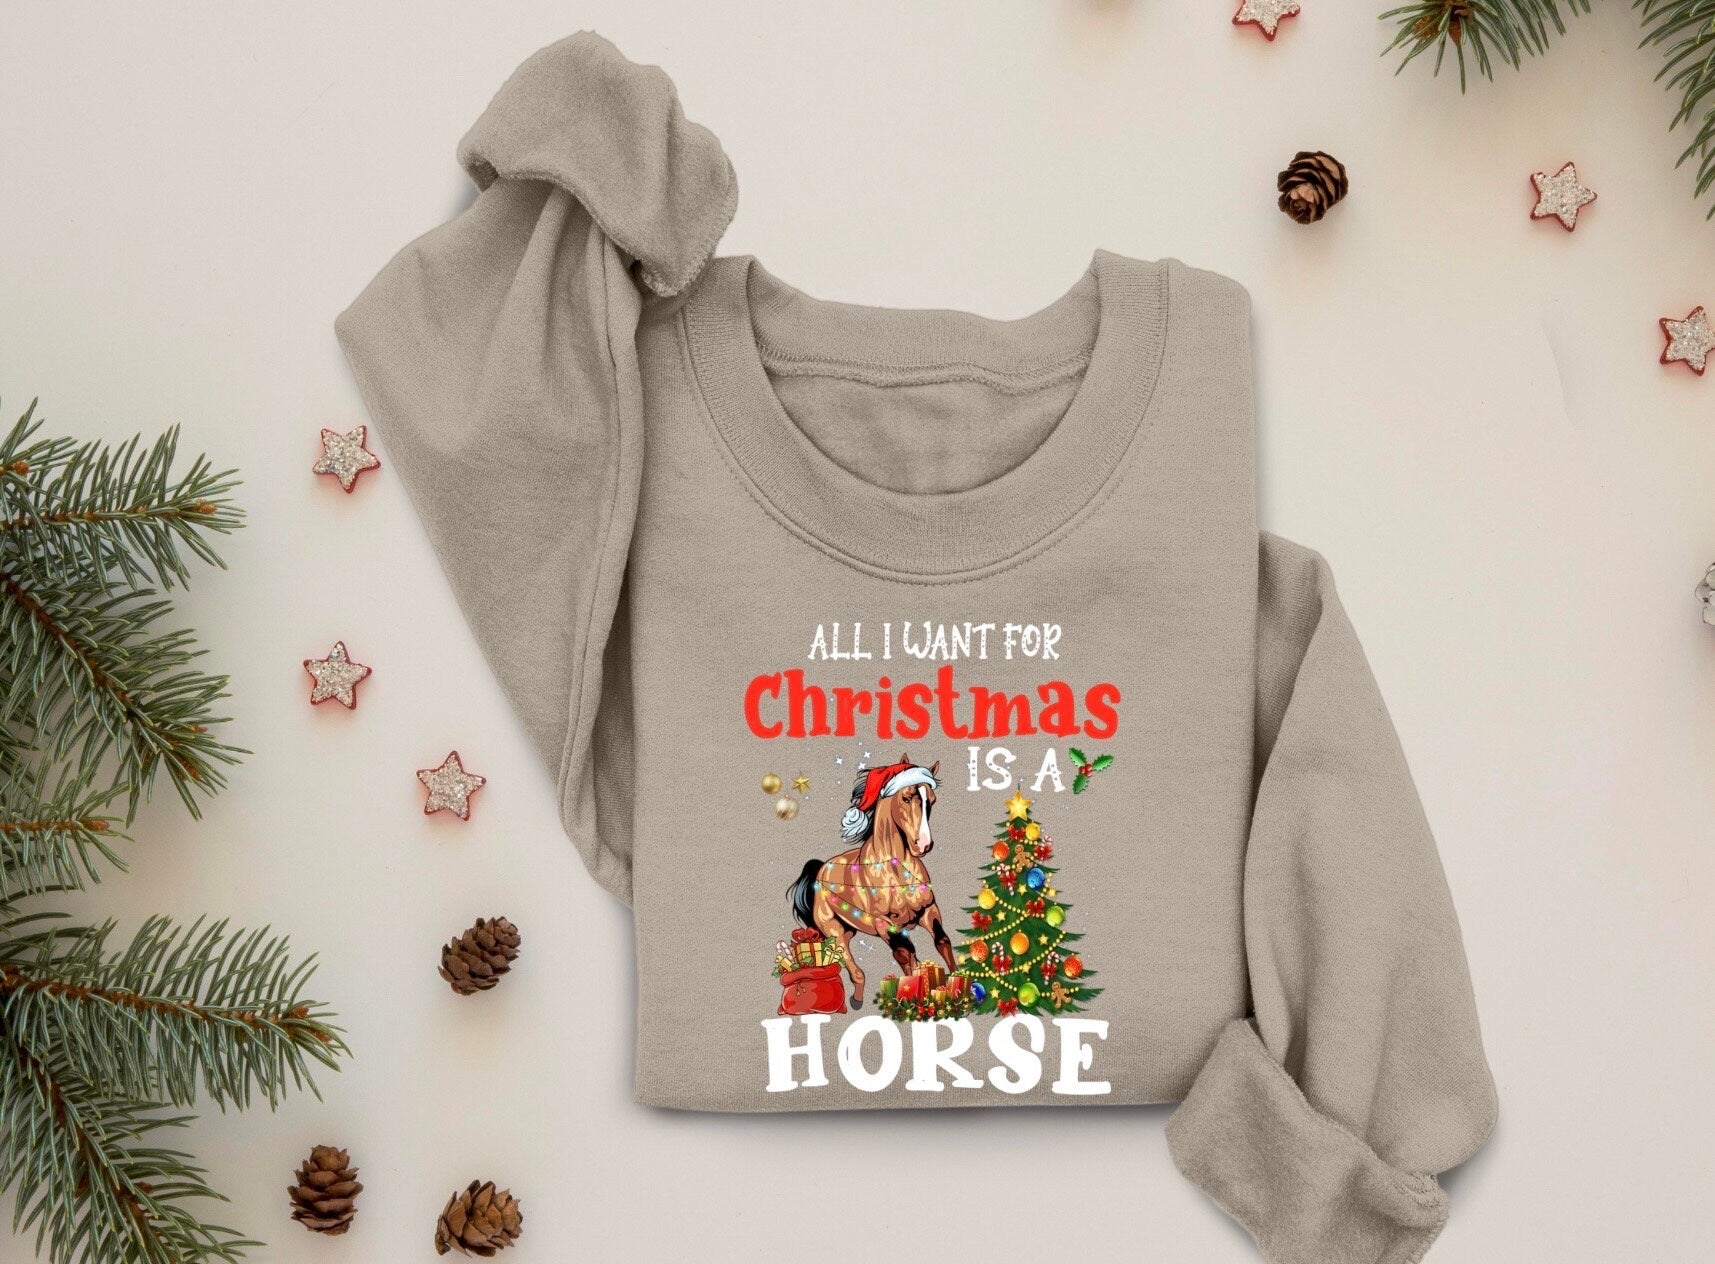 Horse Christmas Sweatshirt, Western Christmas Horse Shirt, Womens Christmas Sweater, Funny Christmas Shirt, Horse Lover Gift, All I want for